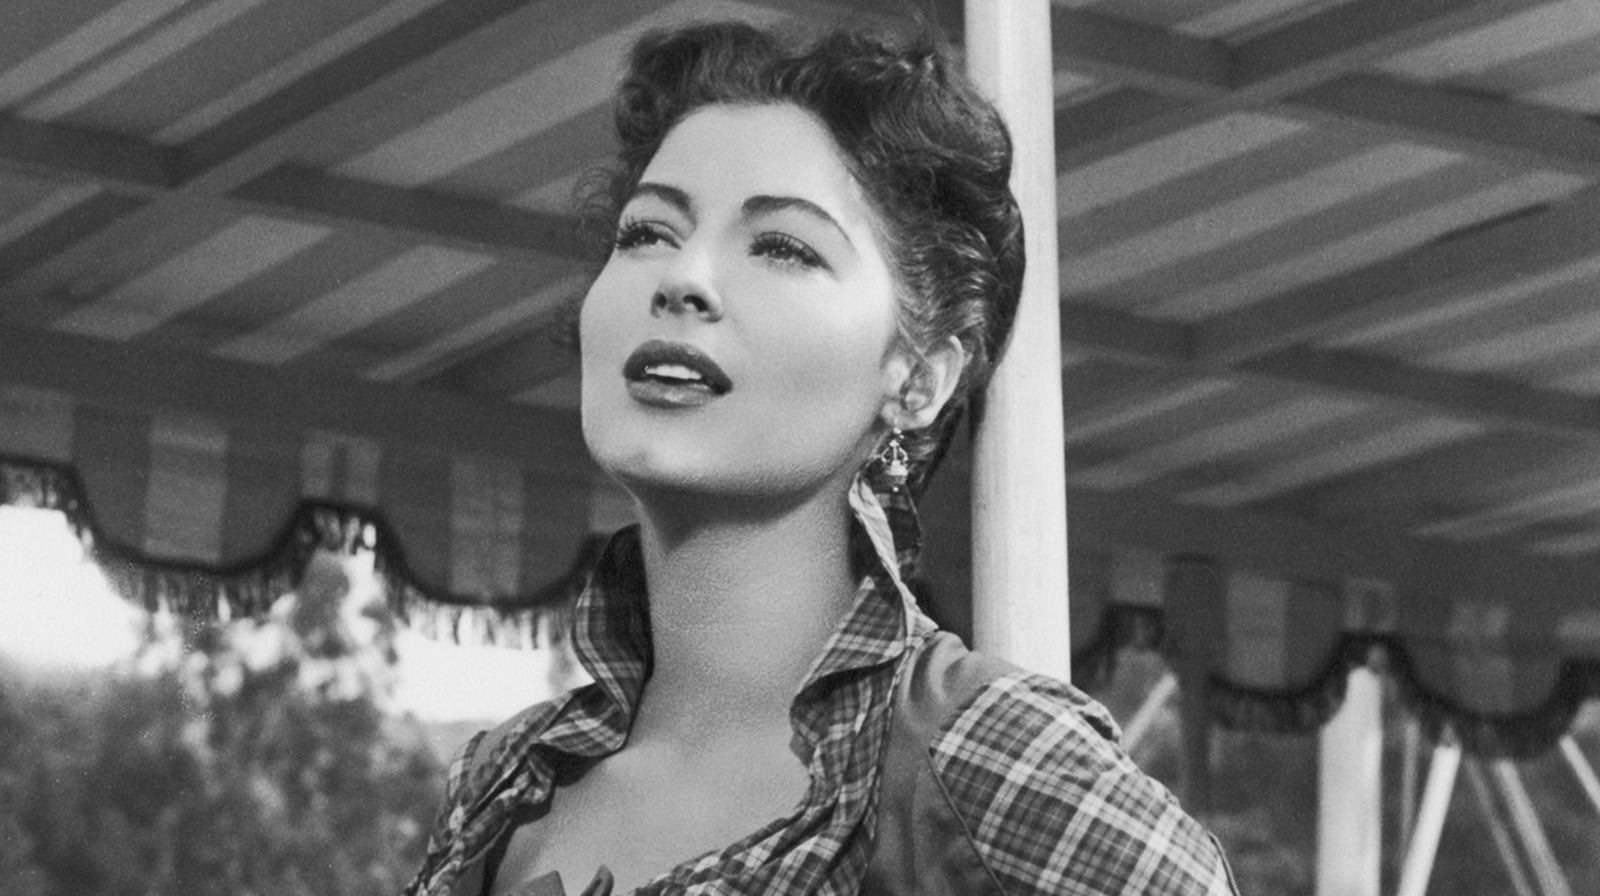 A Disastrous Screen Test Didn't Stop Ava Gardner From Becoming A Movie Star